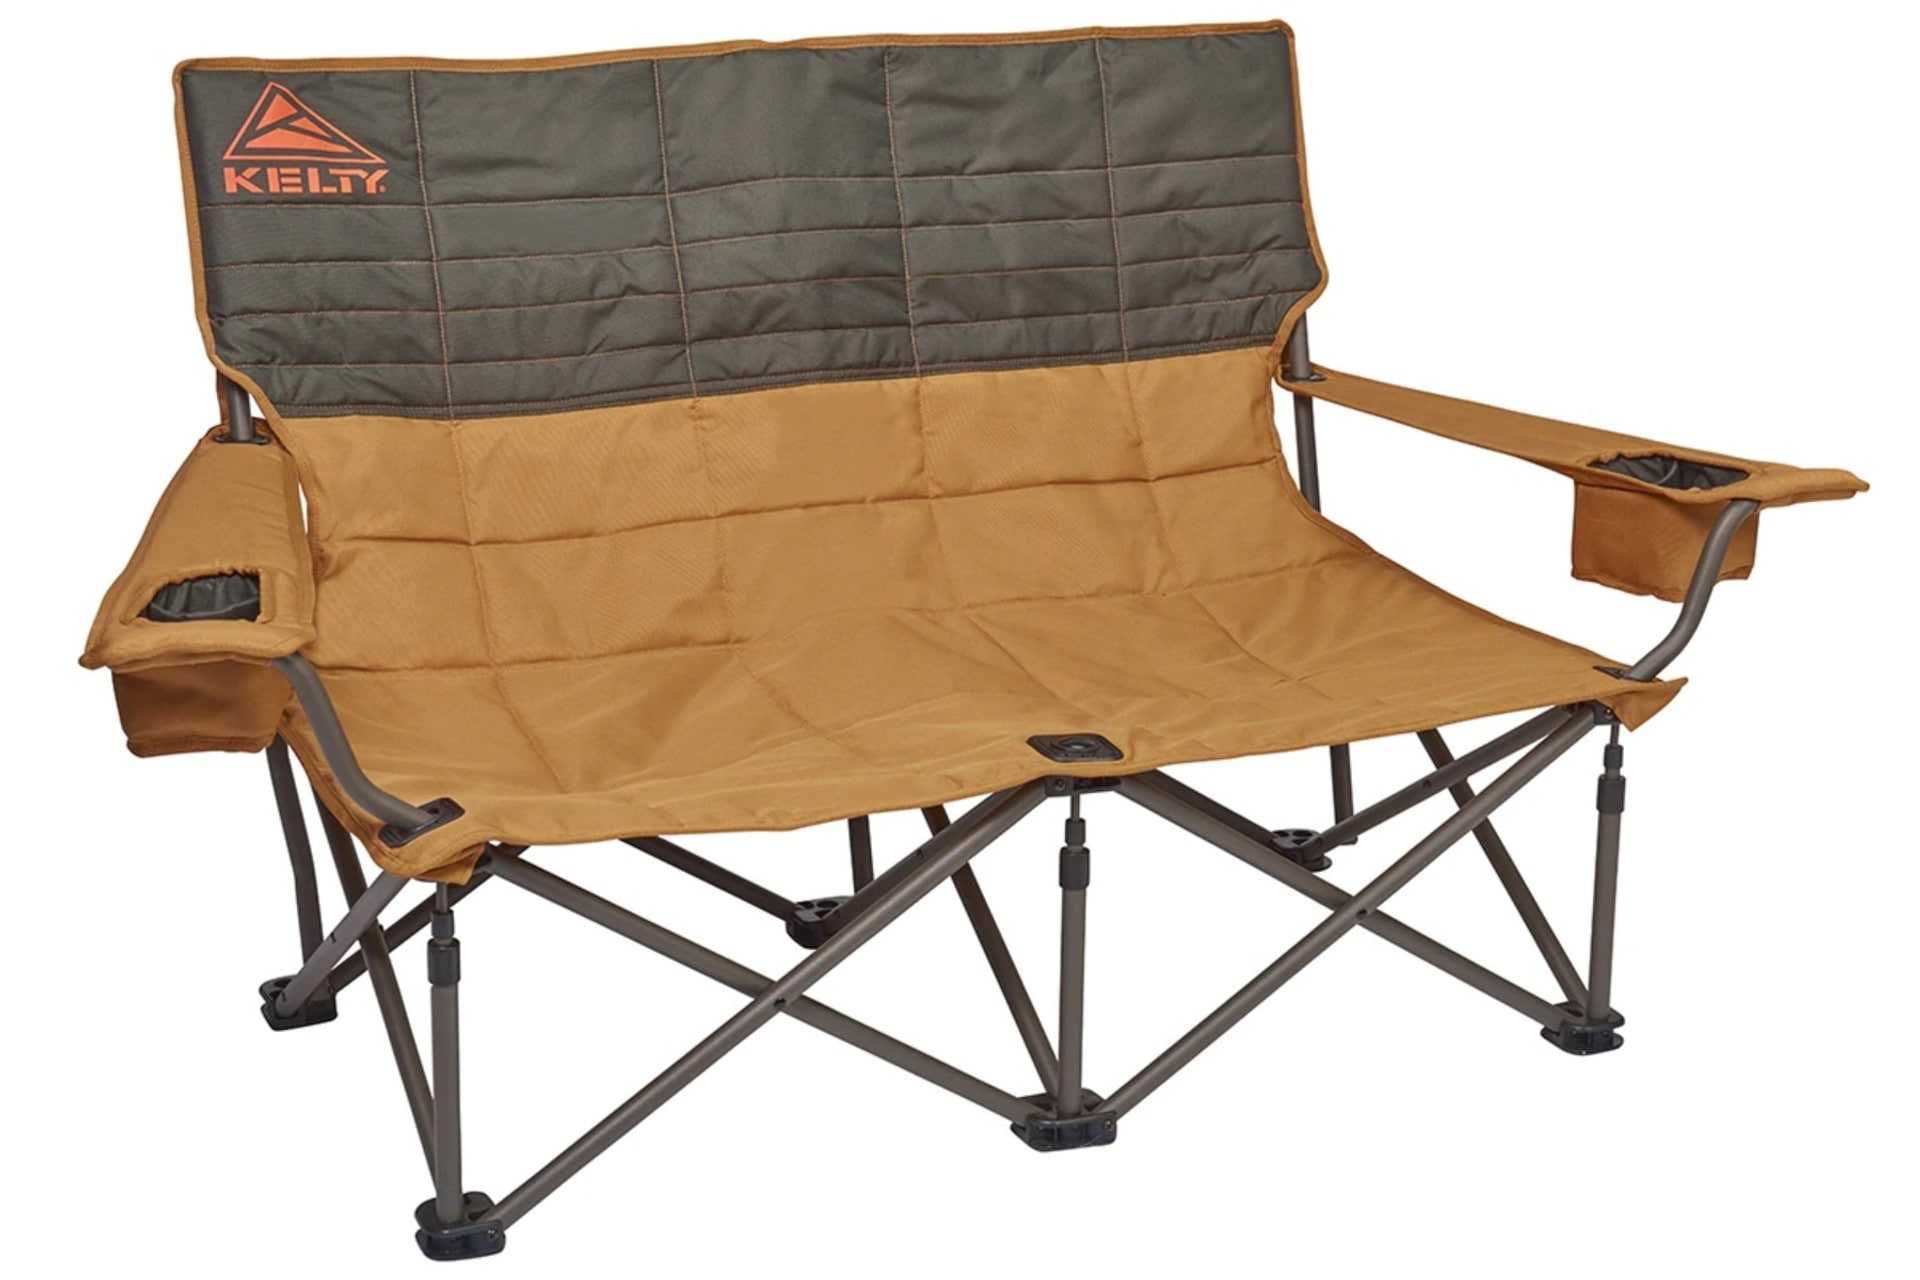 Camping Chair Loveseat